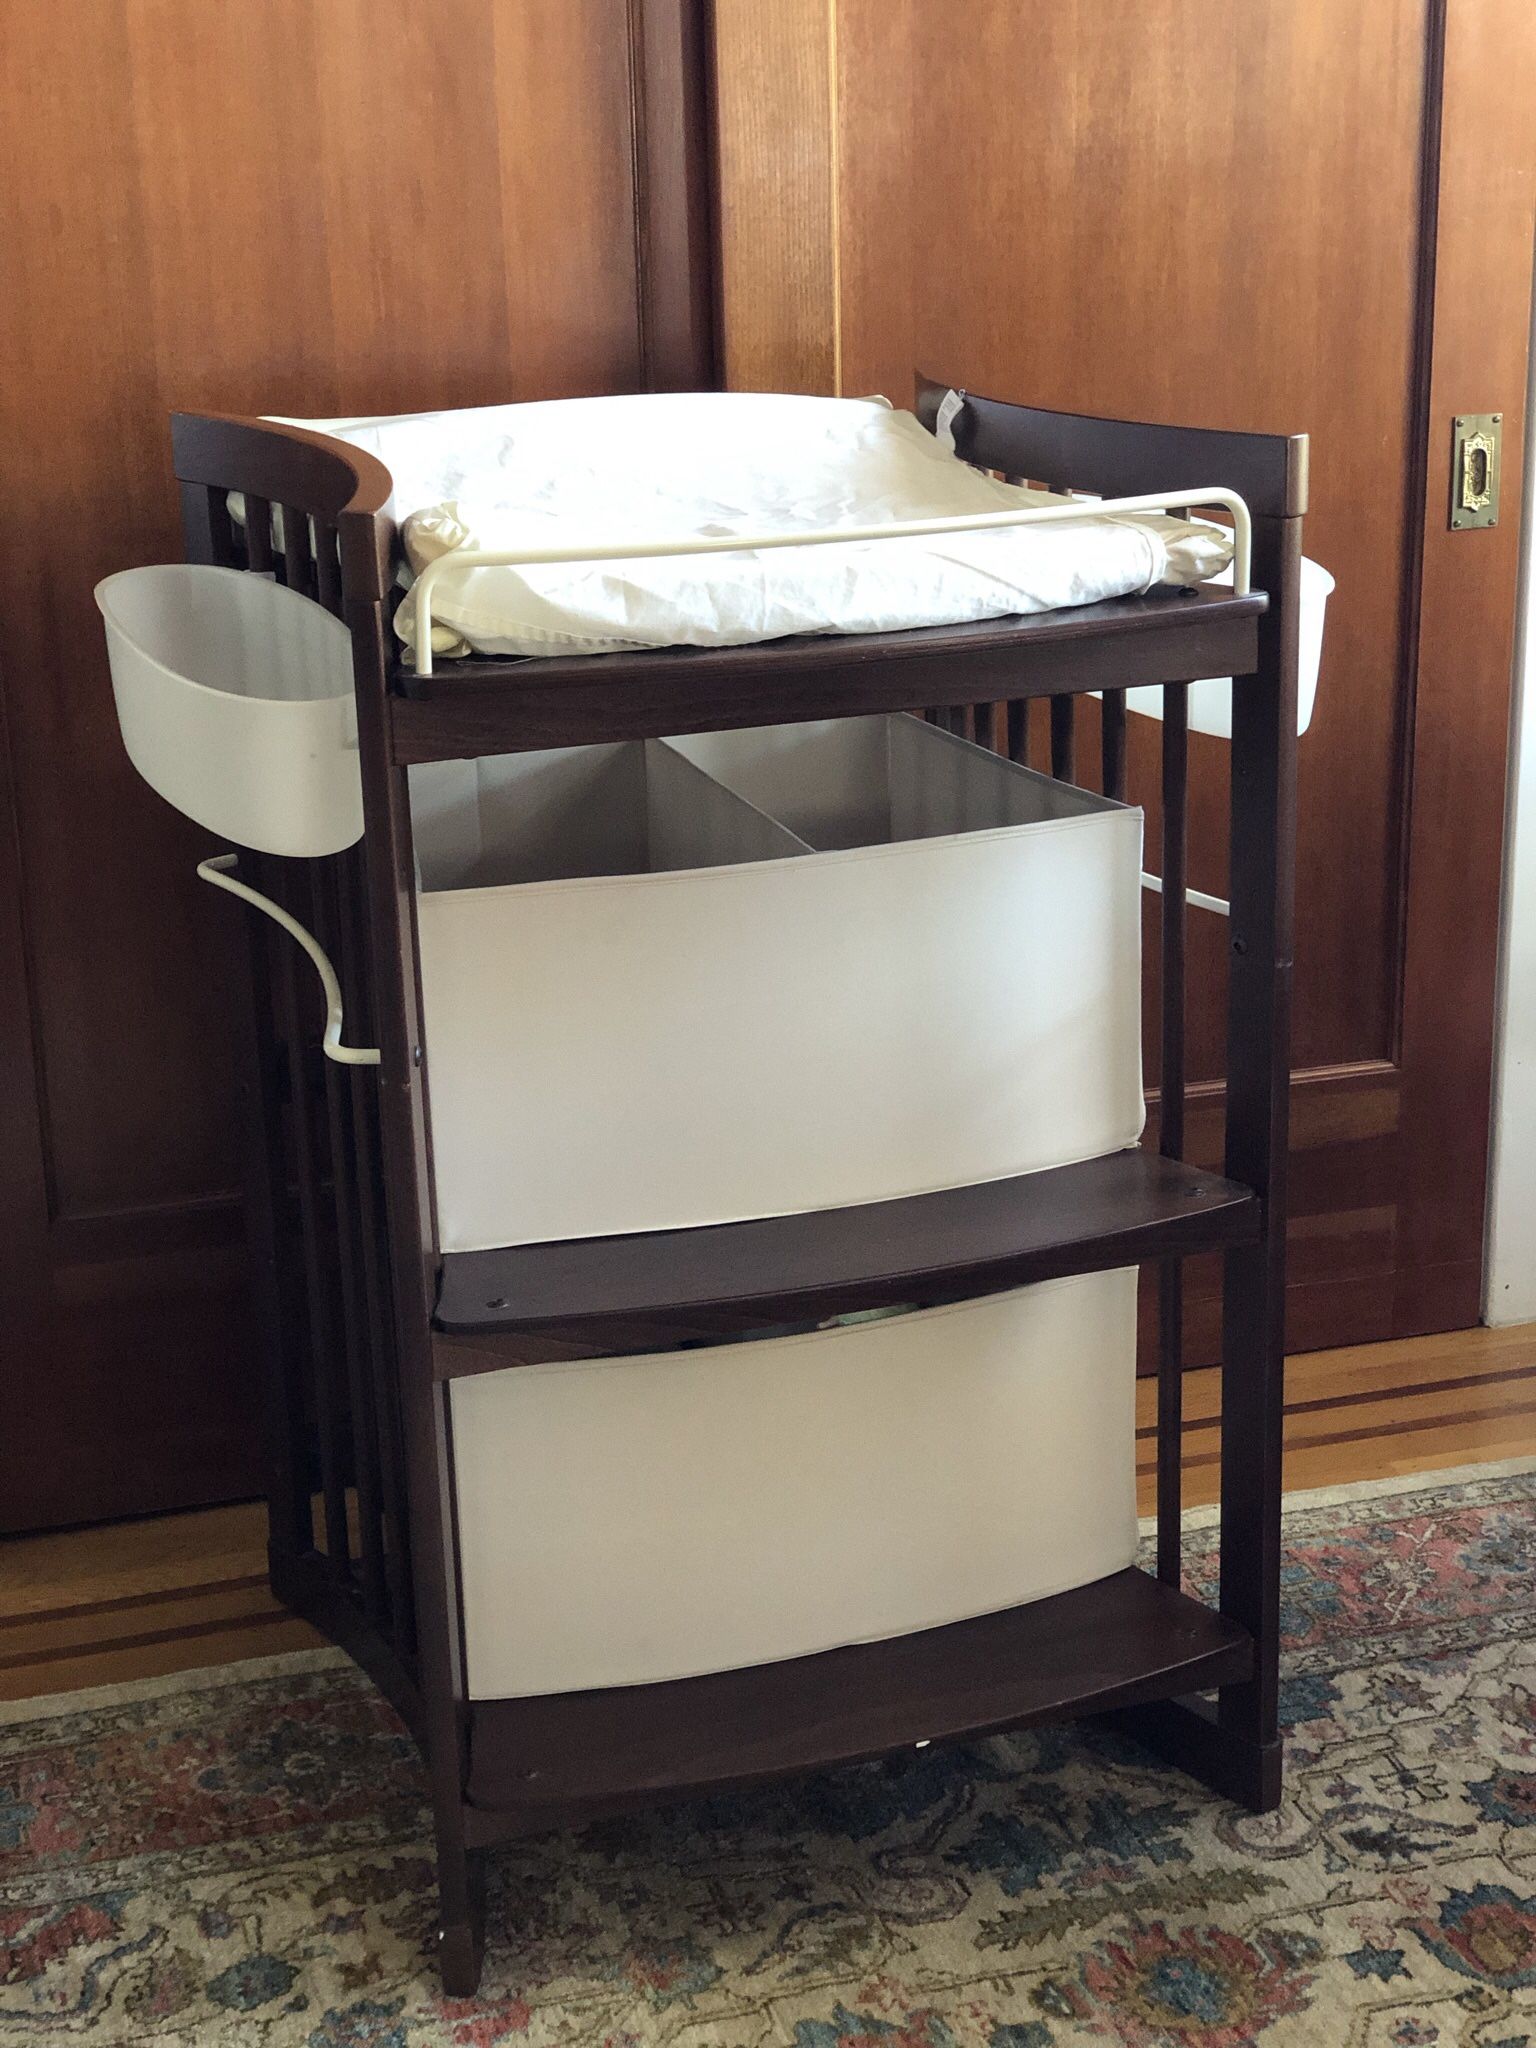 Stokke Changing Table 